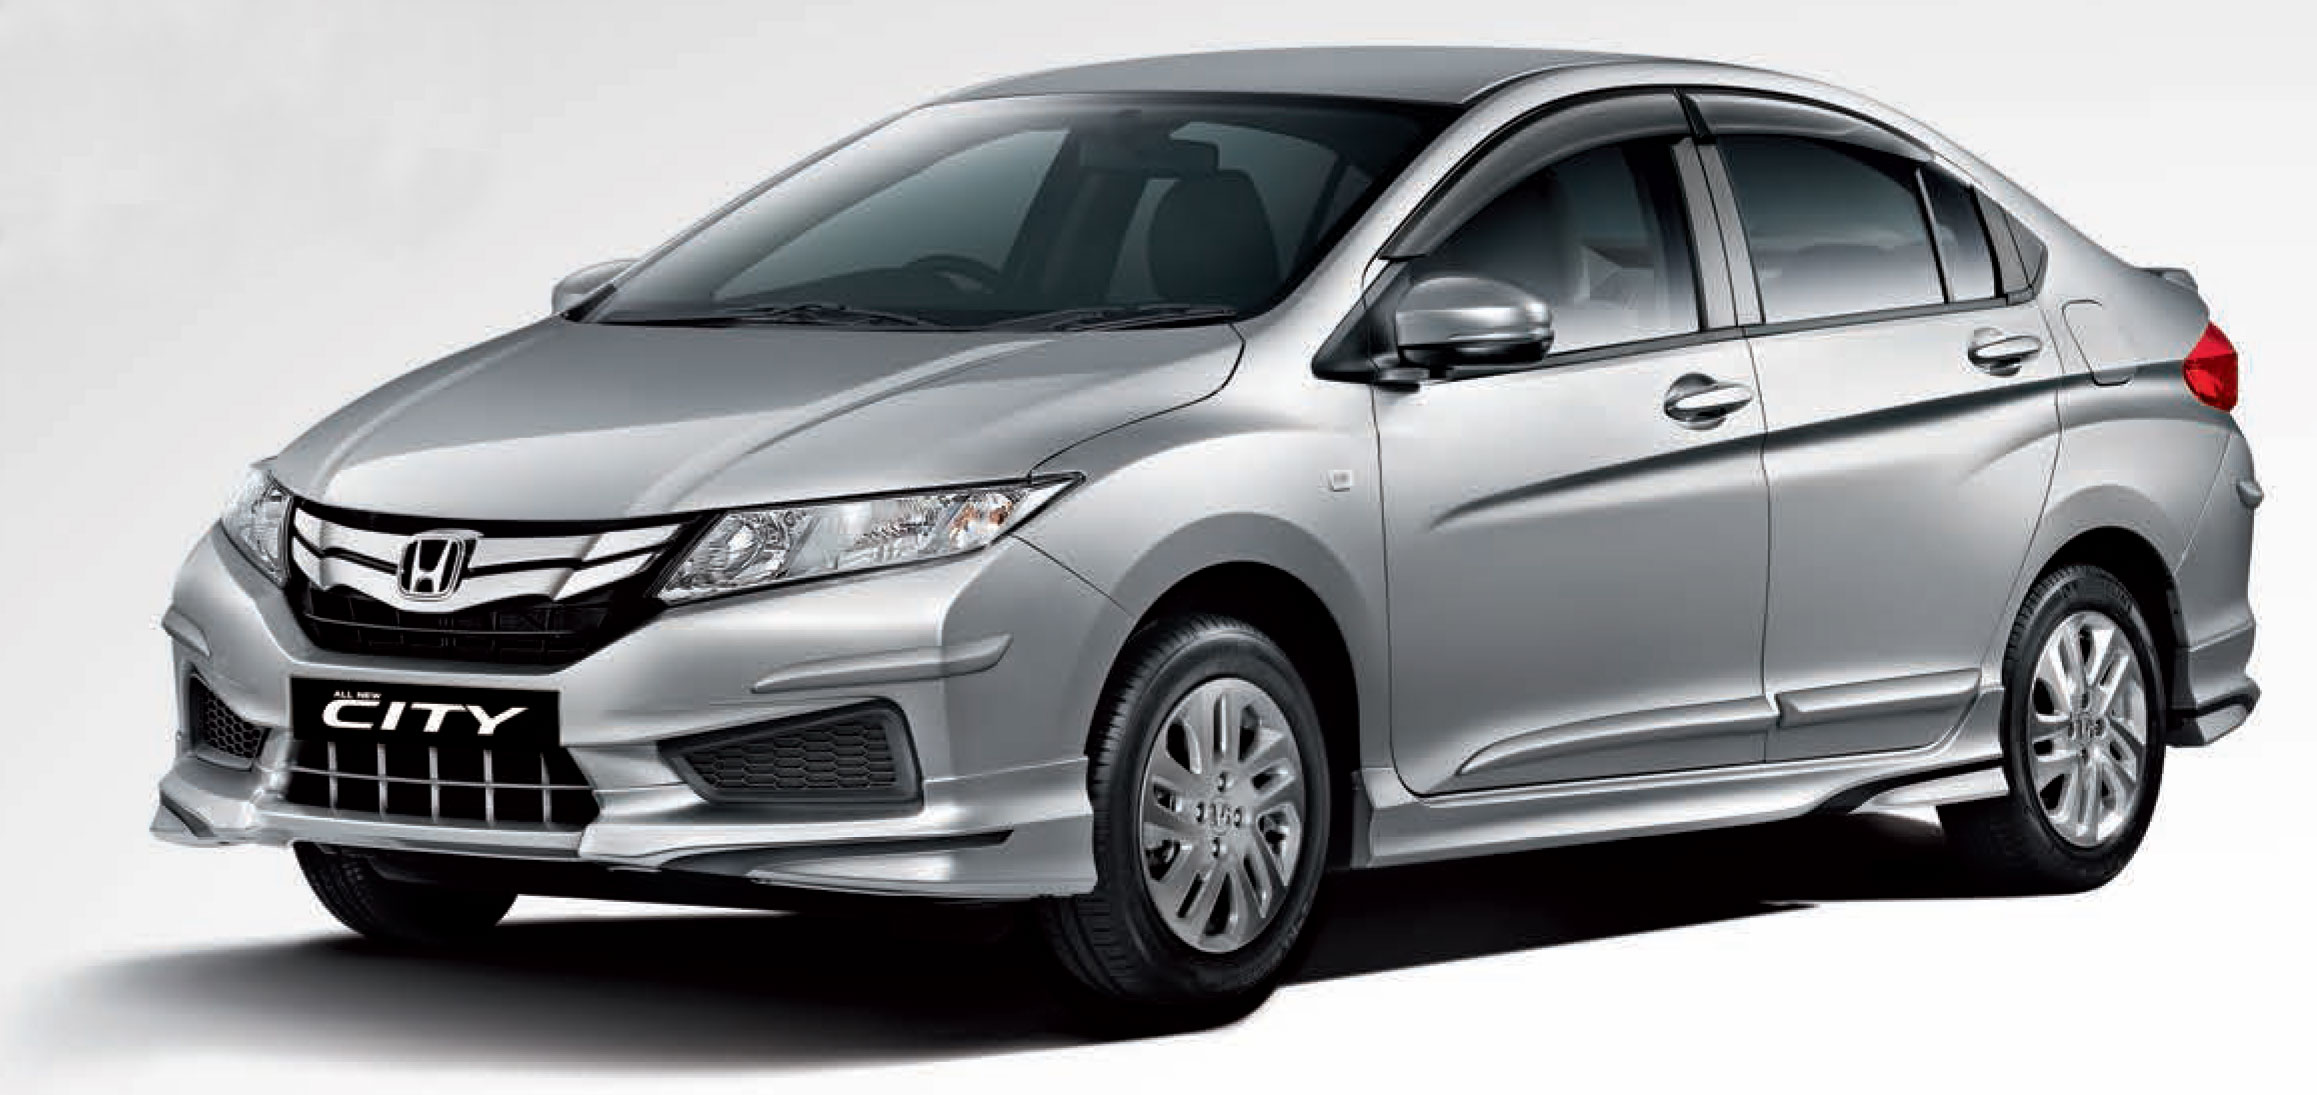 2014 Honda City launched in India - new details Paul Tan - Image 220646